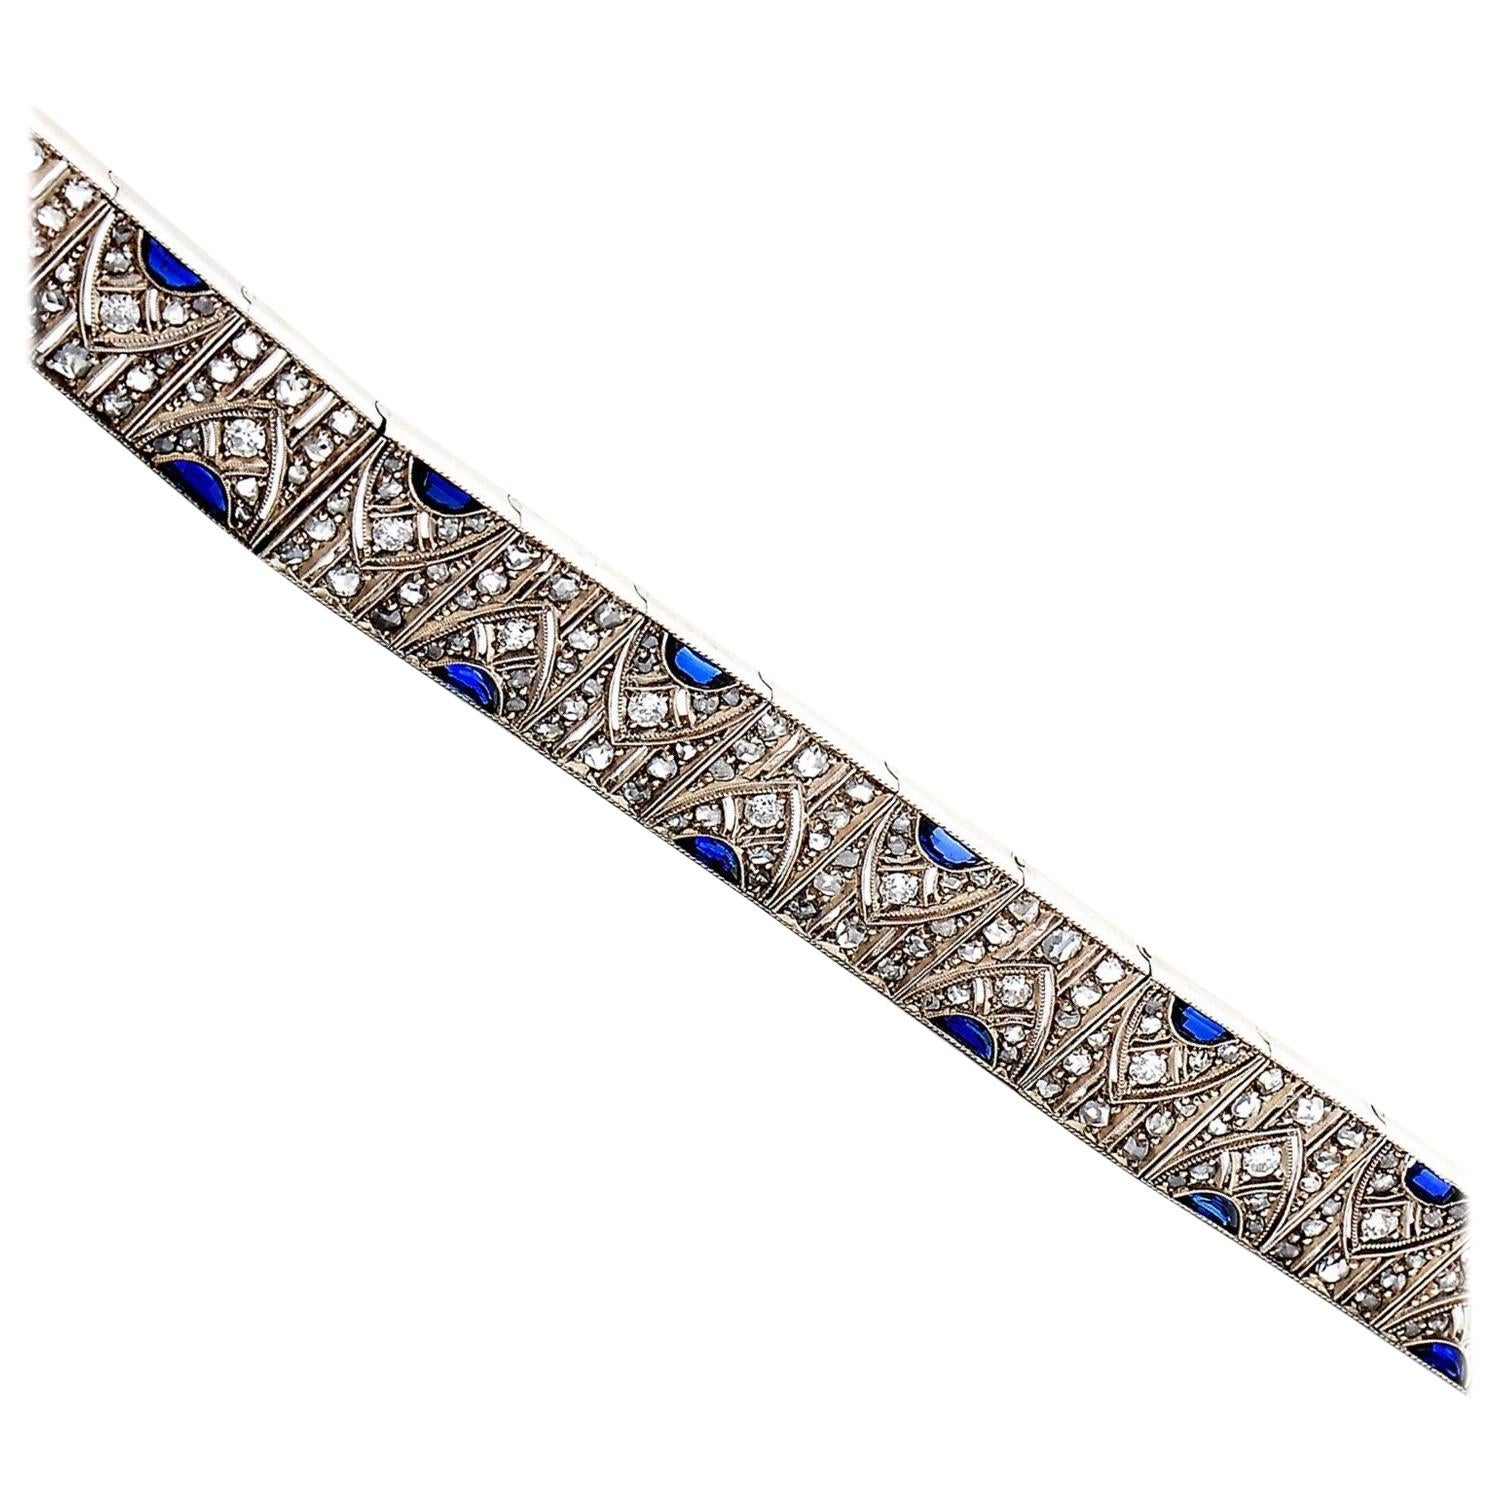 Art Deco Synthetic* Sapphire and Diamond Geometric Bracelet in Platinum and Gold, Portugal, 1920s-1930s, Signed by Tinoco & Irmão. This antique bracelet is designed as a sequence of 17 openwork geometric squared panels depicting a cathedral motif,